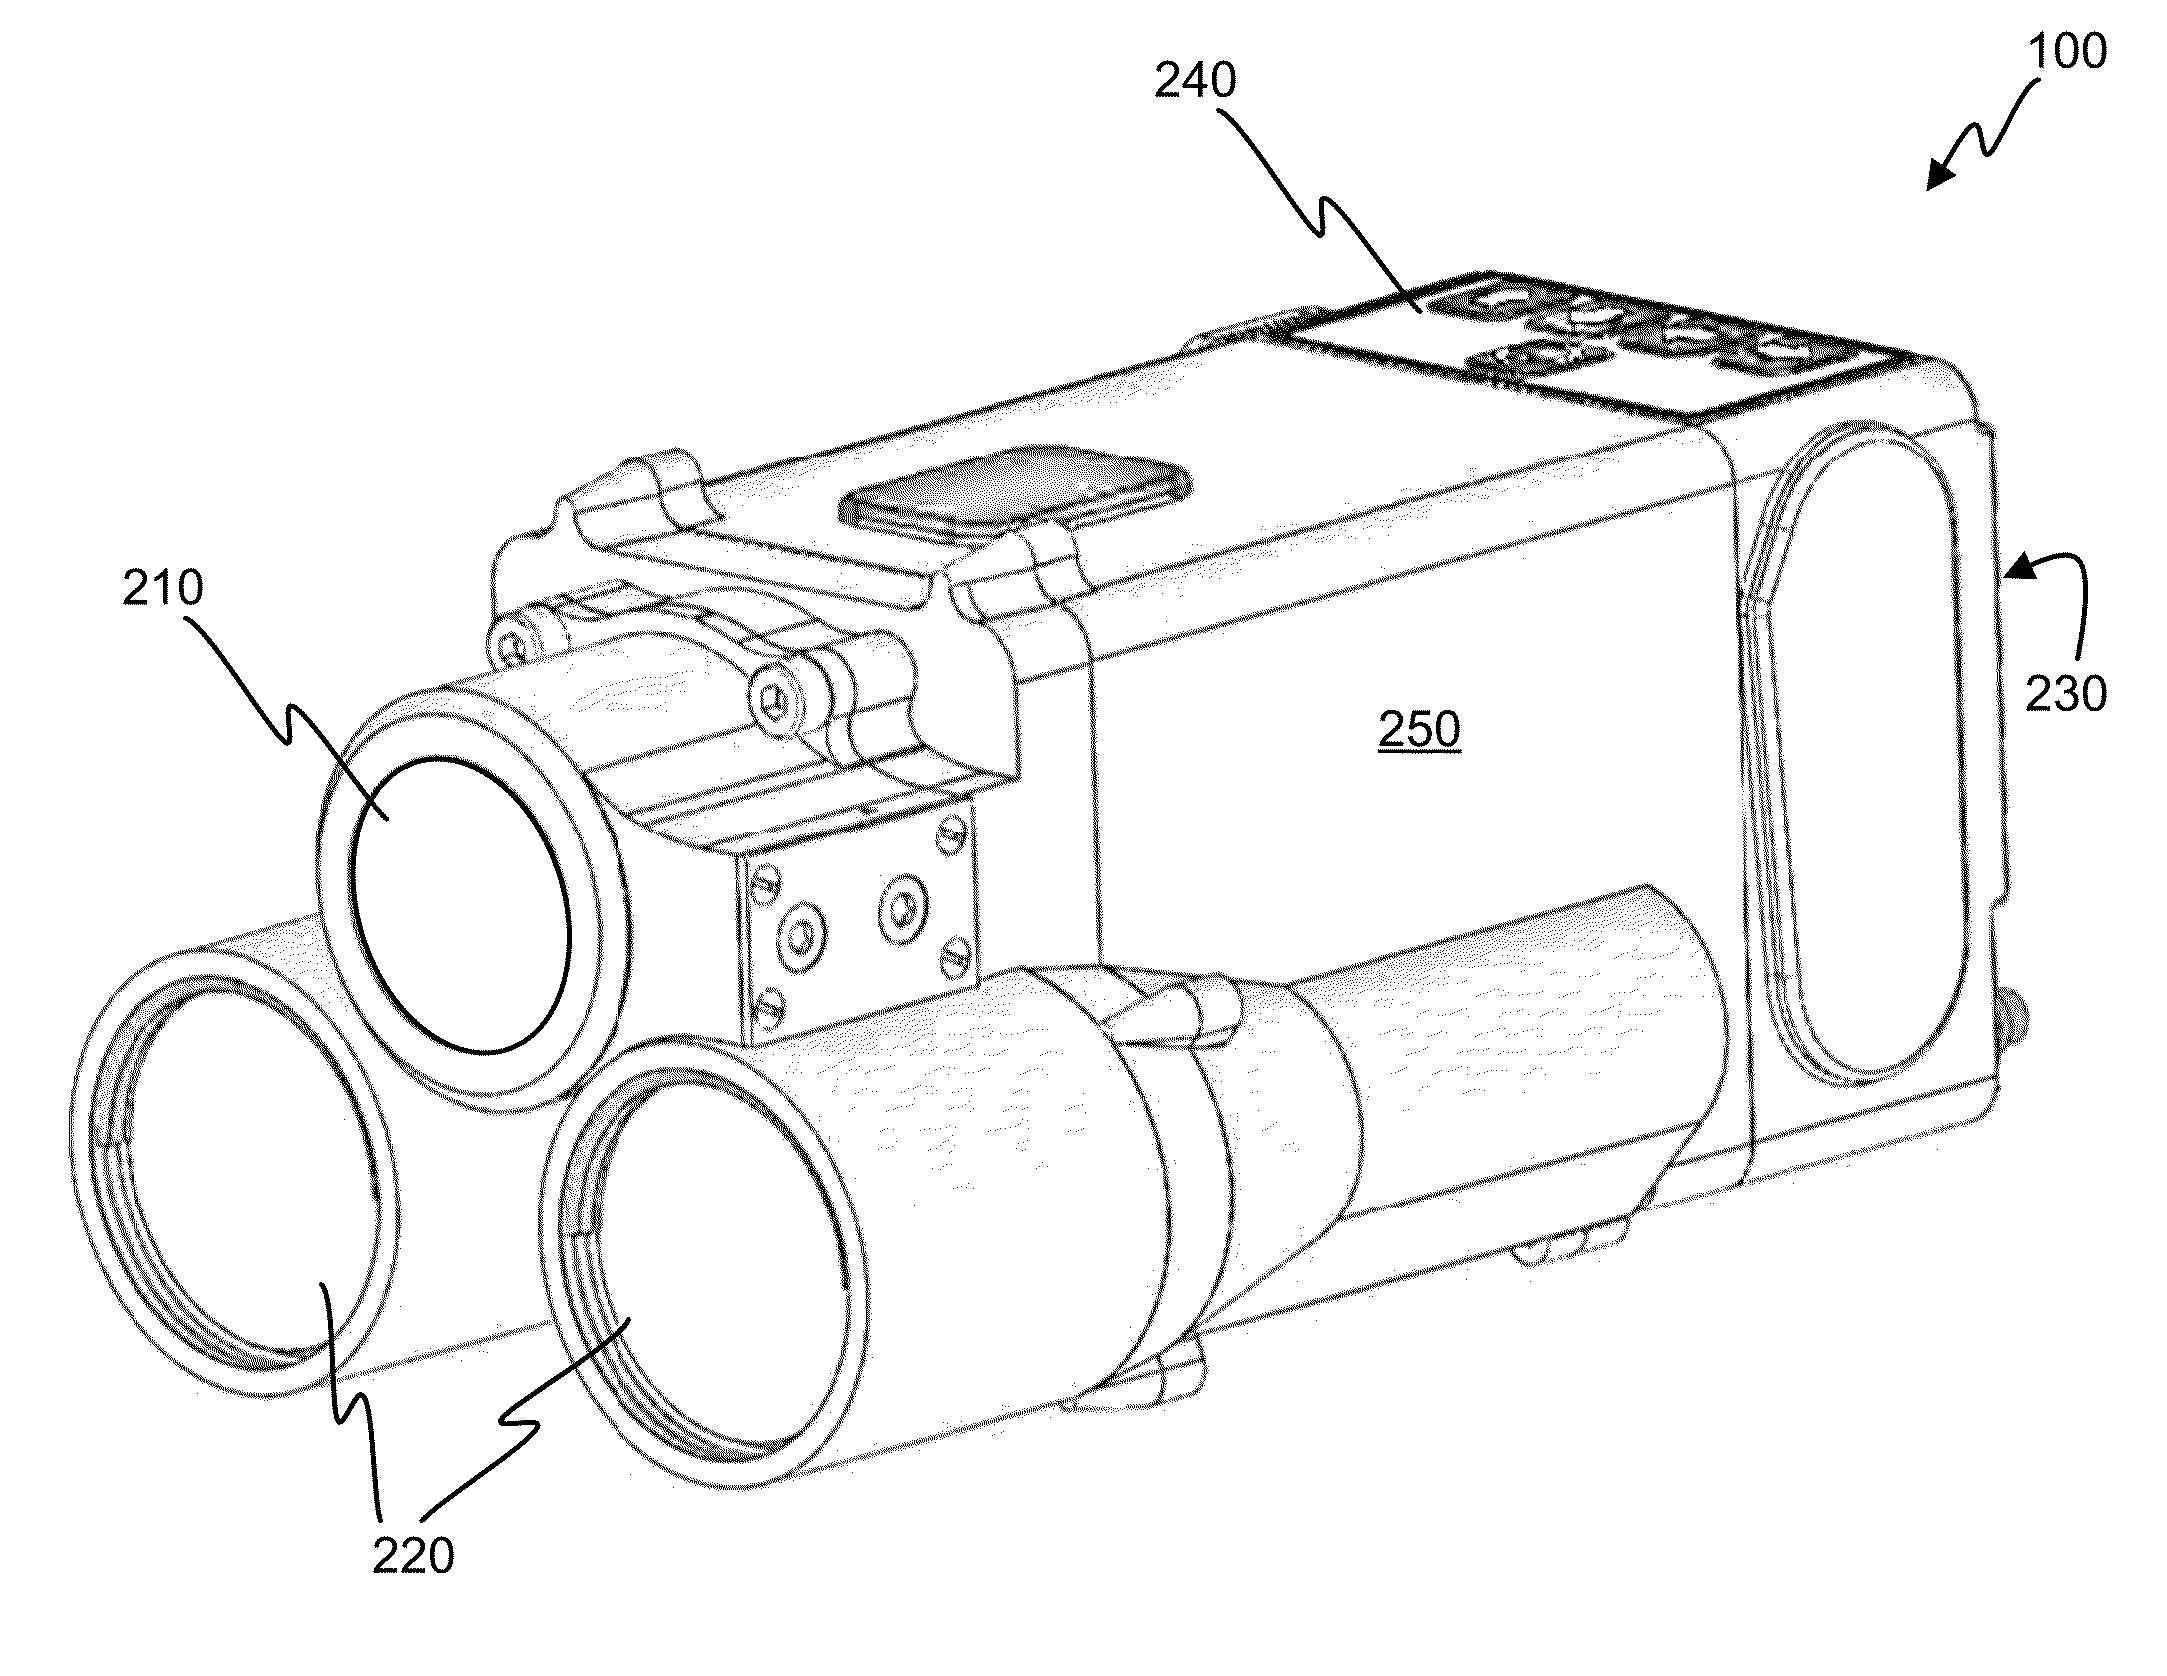 Riflescope with integrated wind sensor and targeting display